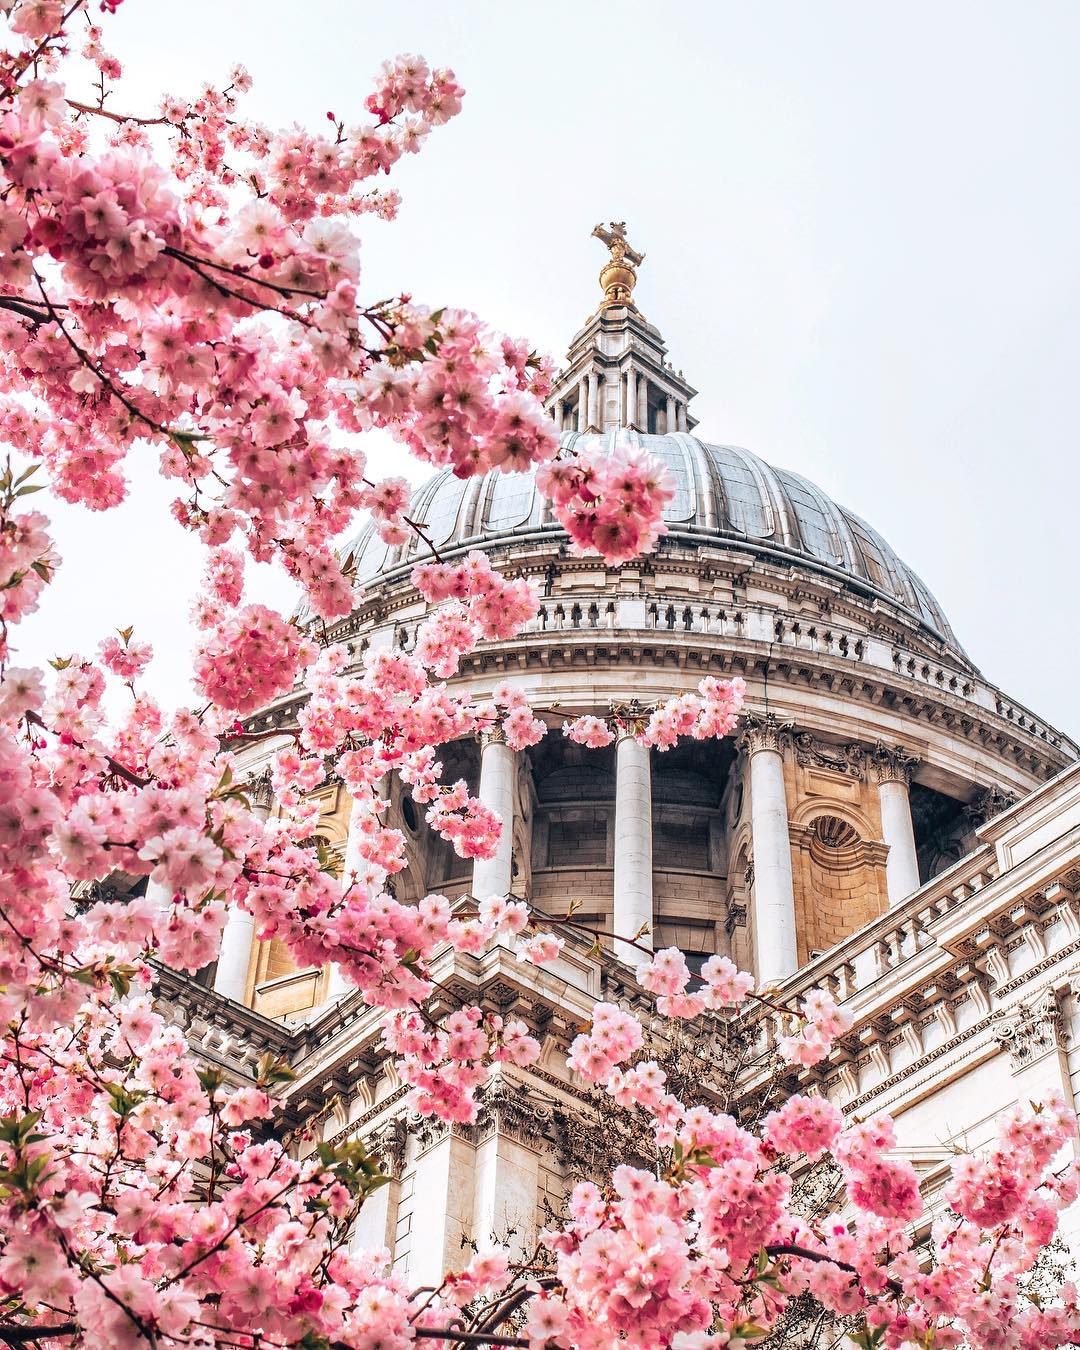 Travel Inspiration | Around the World by Instagram Vol. 02, No. 02 – in 37 Breathtaking Images from the Amsterdam Canals to the Magnolia Blossoms in Paris